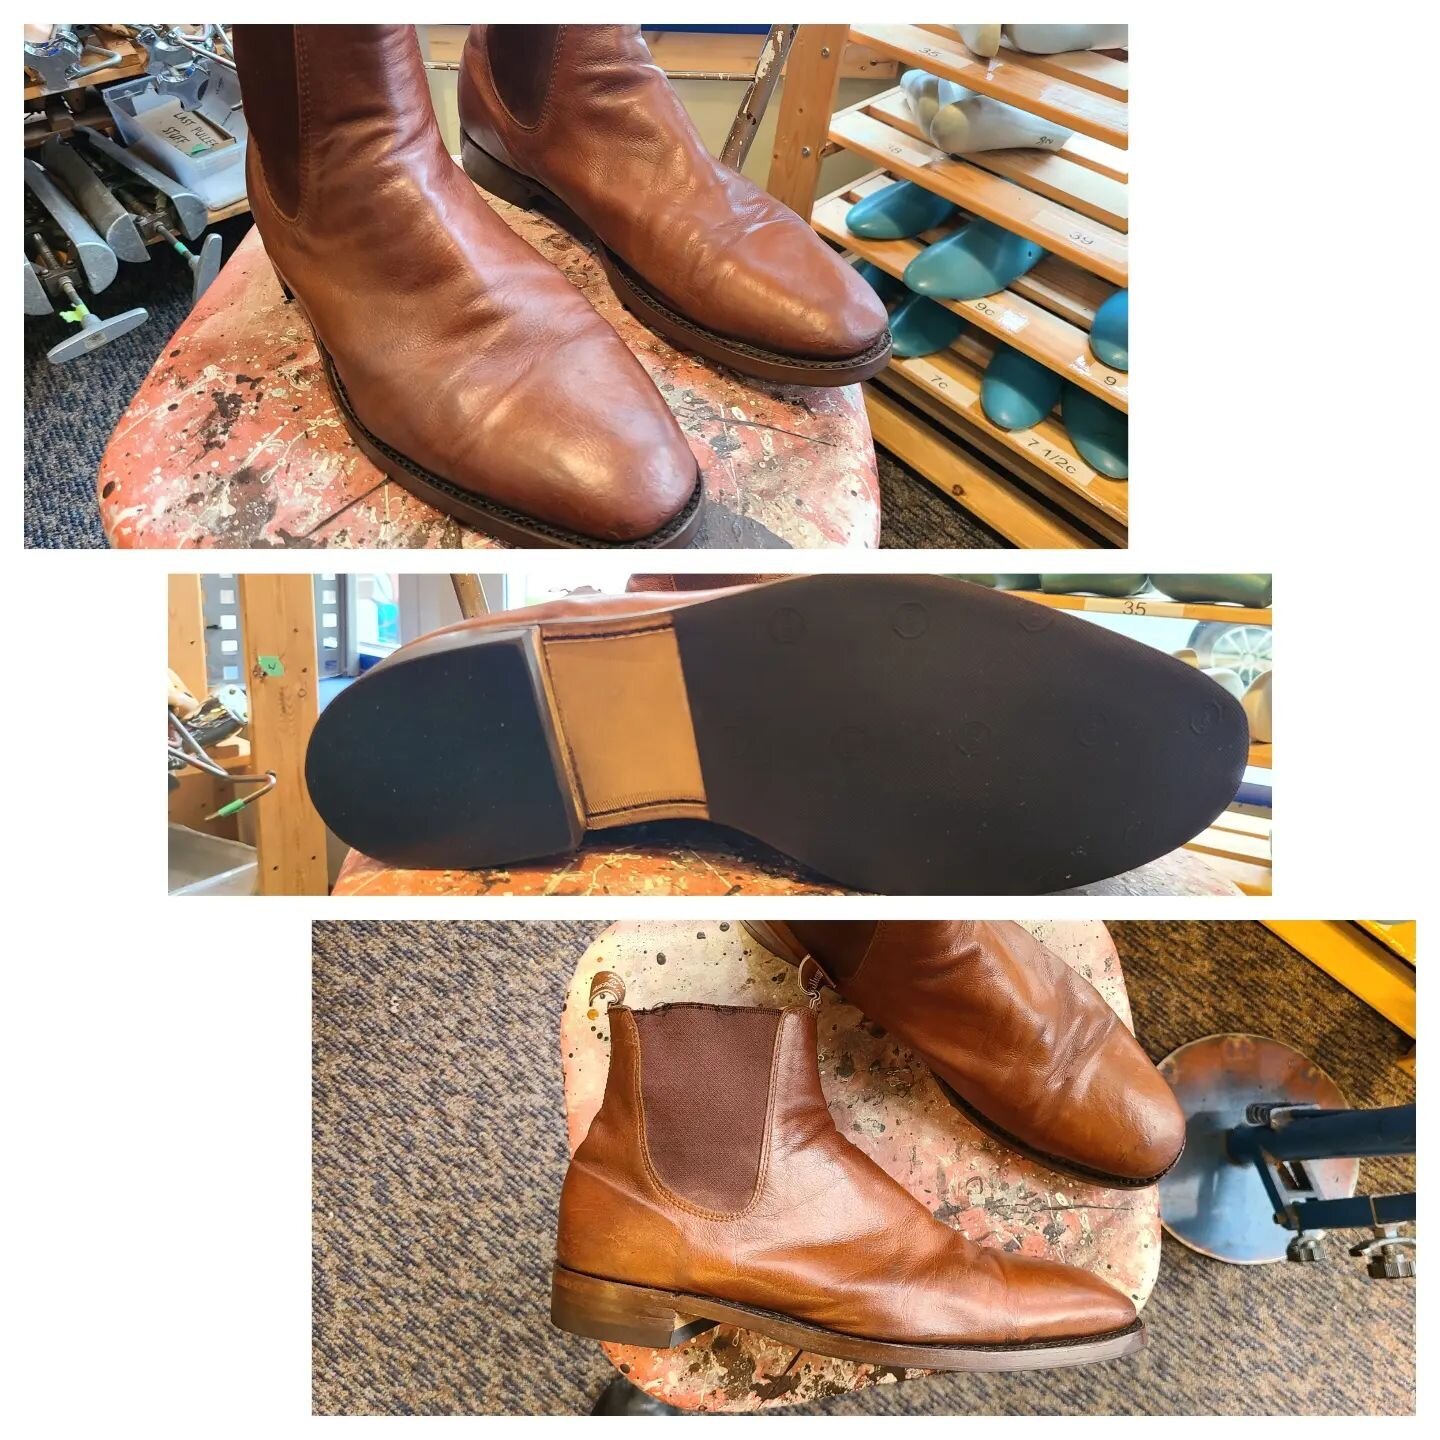 These @rmwilliams came in for a complete rebuild. These boots seem to be built specifically to get beaten the hell up and still come out beautiful. This colour might be one of my favourites. 

These were rebuilt using @jr_by_kilger leather soles and 